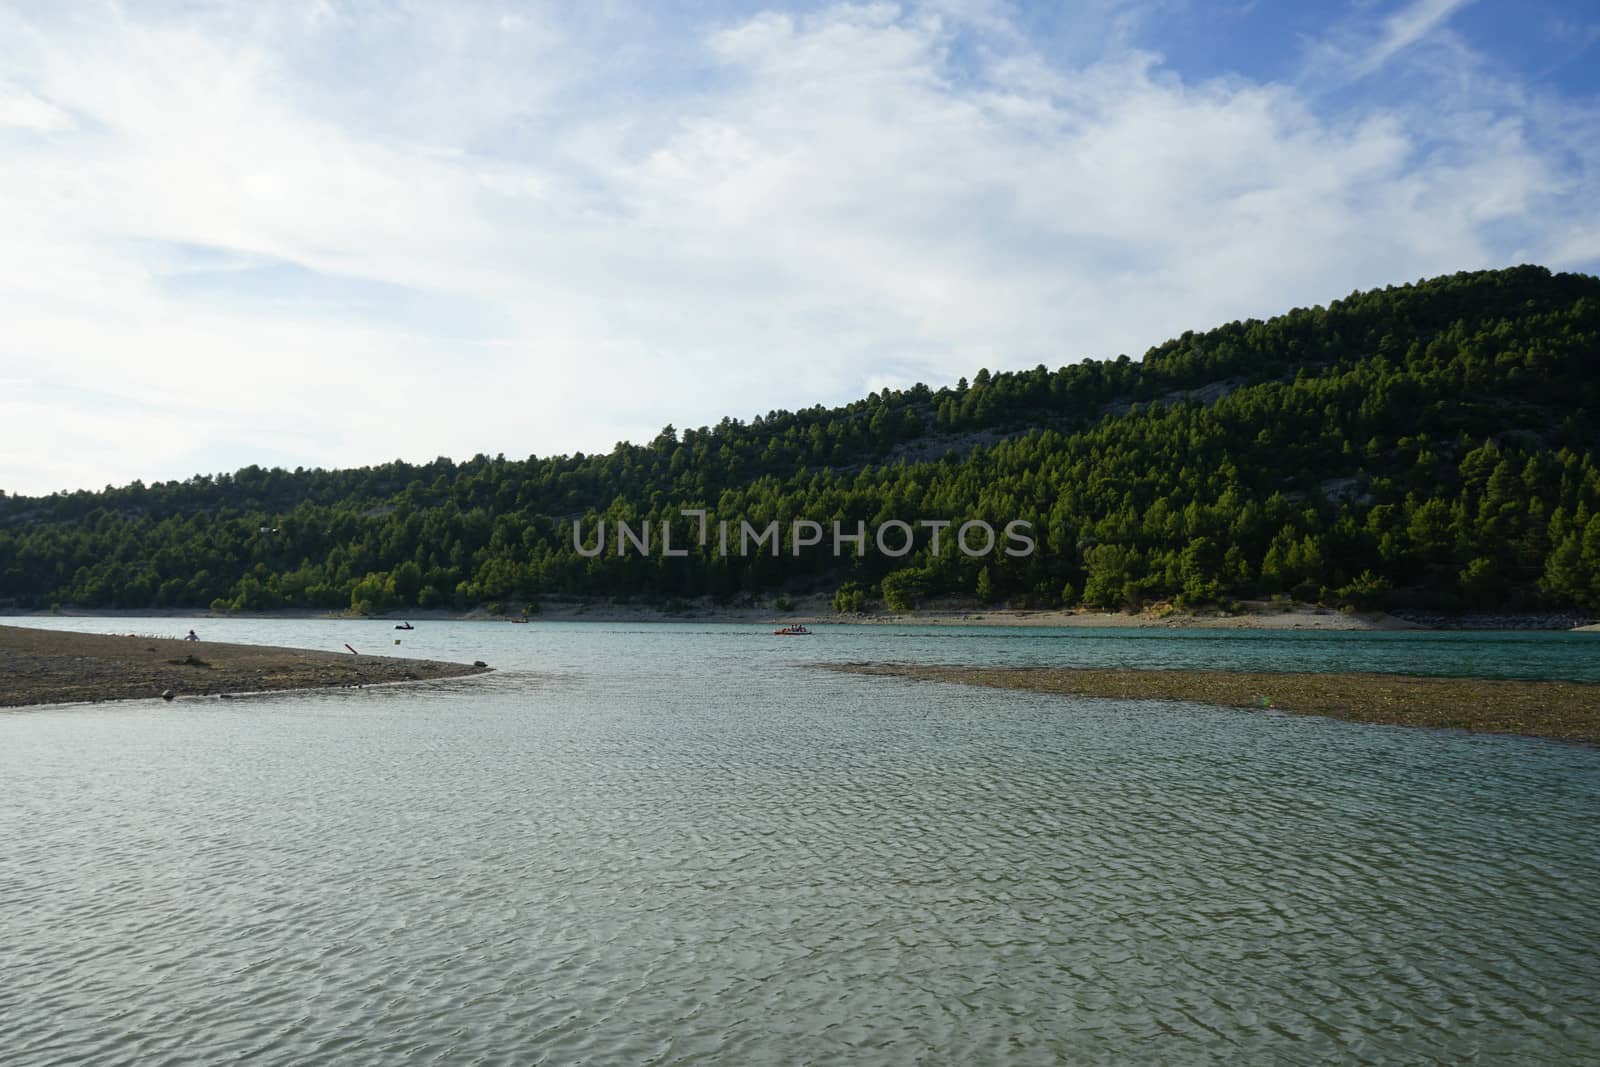 Overview of the reservoir that form the Sainte-Croix lake between the Verdon gorges, France